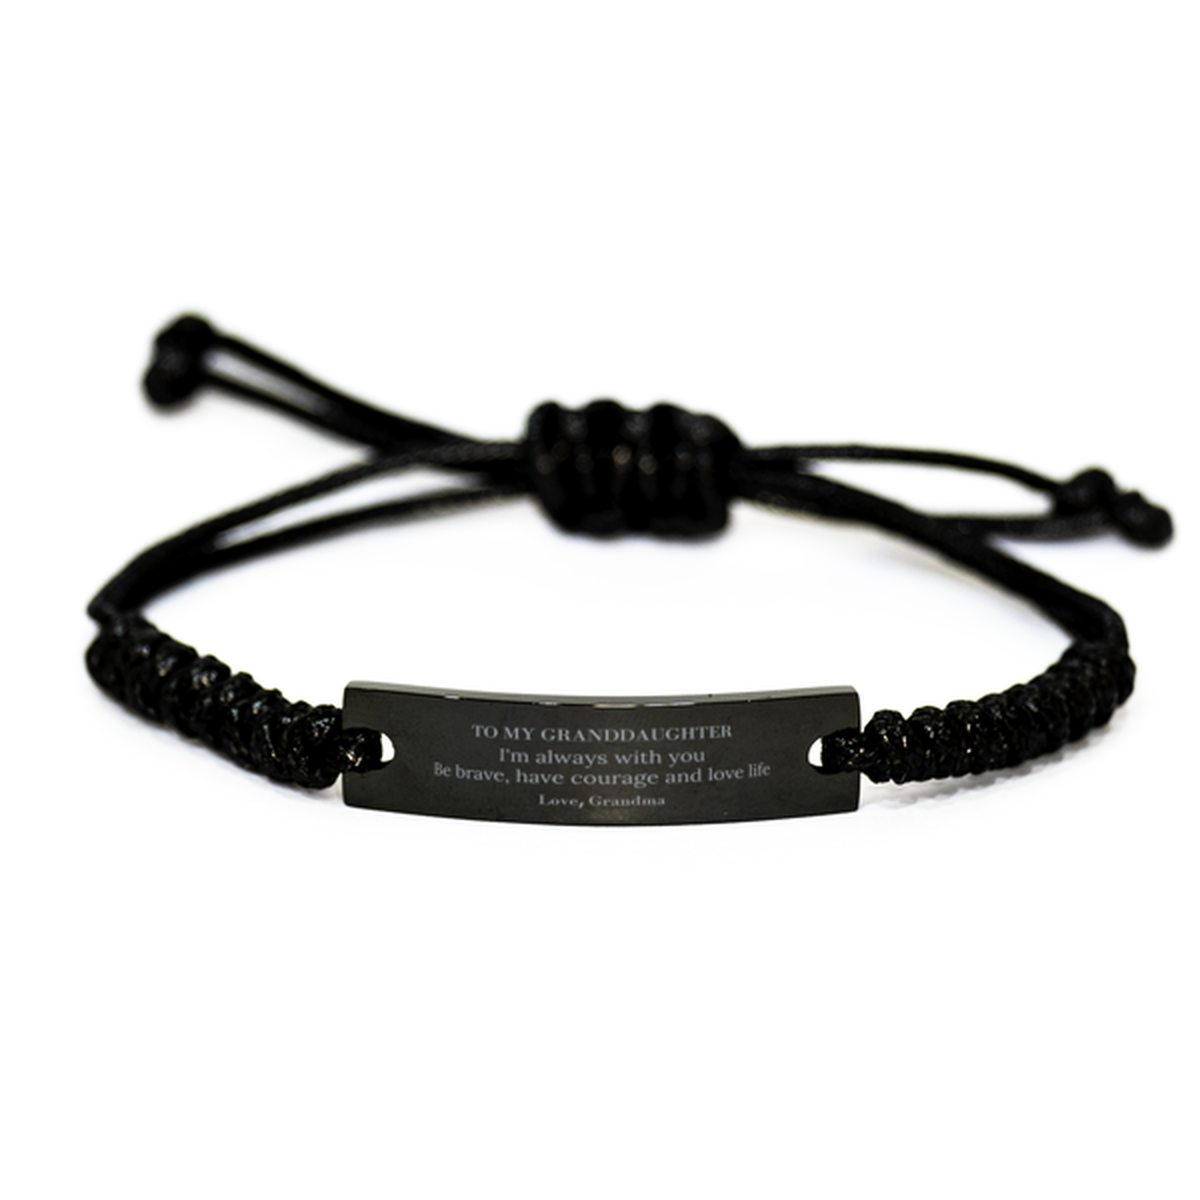 To My Granddaughter Gifts from Grandma, Unique Black Rope Bracelet Inspirational Christmas Birthday Graduation Gifts for Granddaughter I'm always with you. Be brave, have courage and love life. Love, Grandma